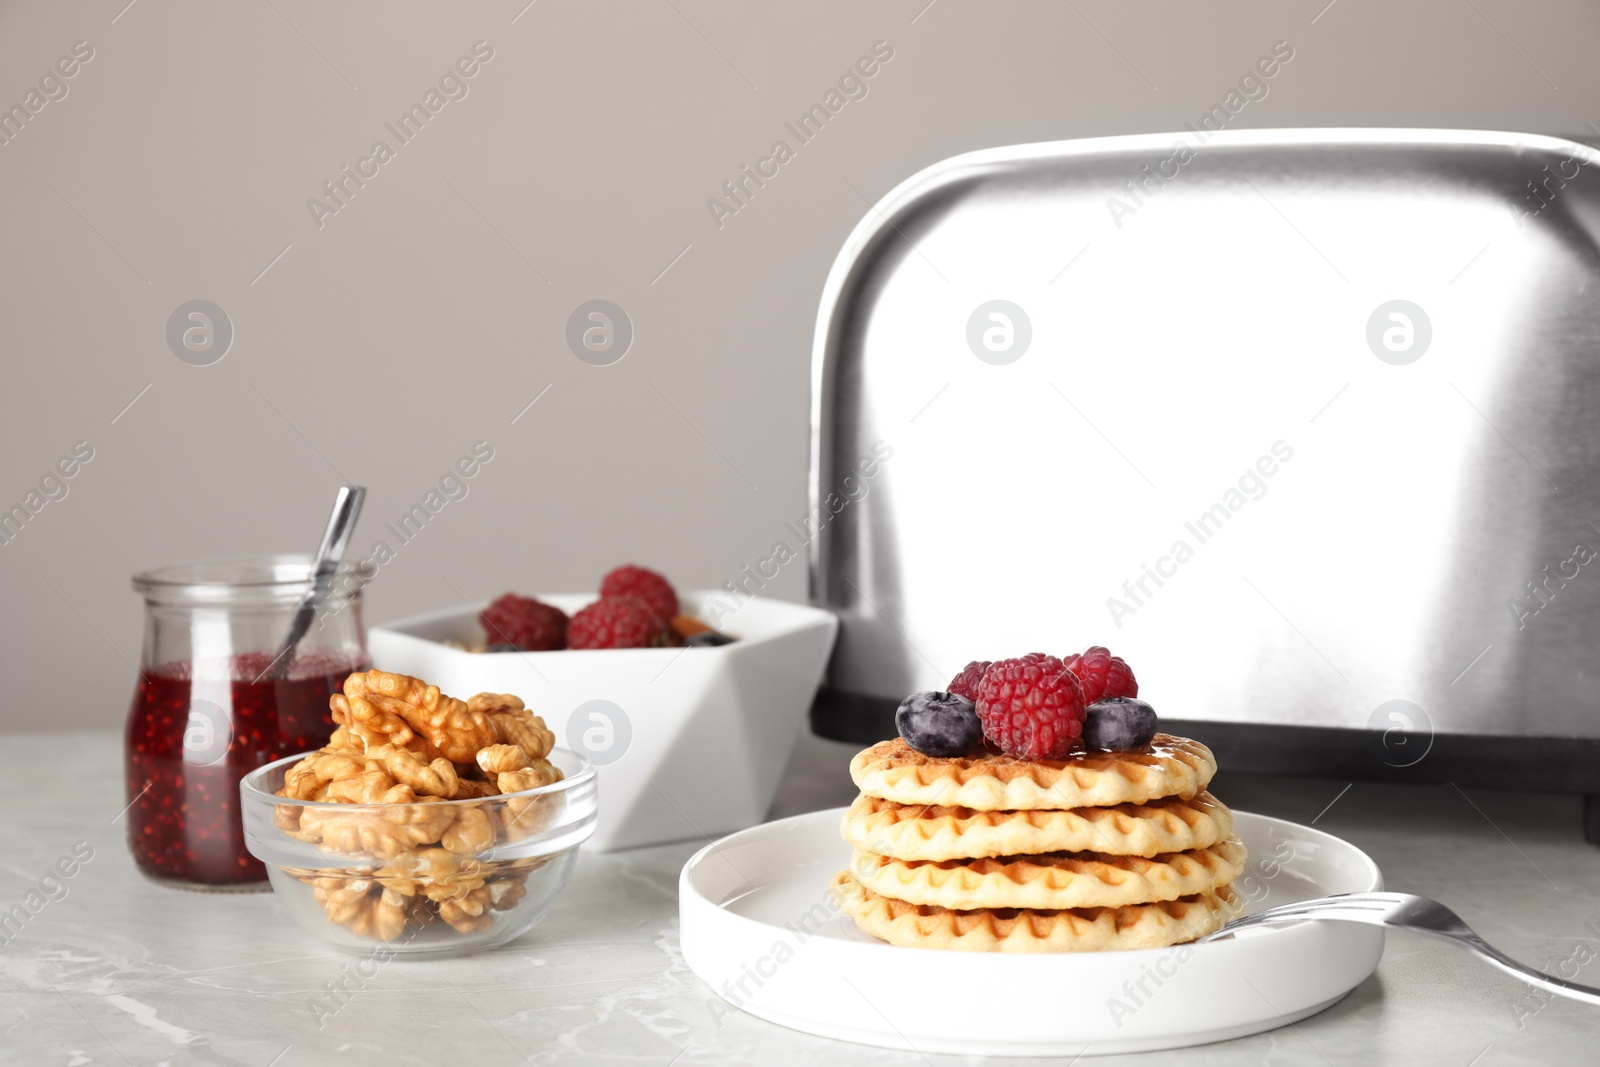 Photo of Delicious breakfast with waffles and berries served on light marble table against grey background